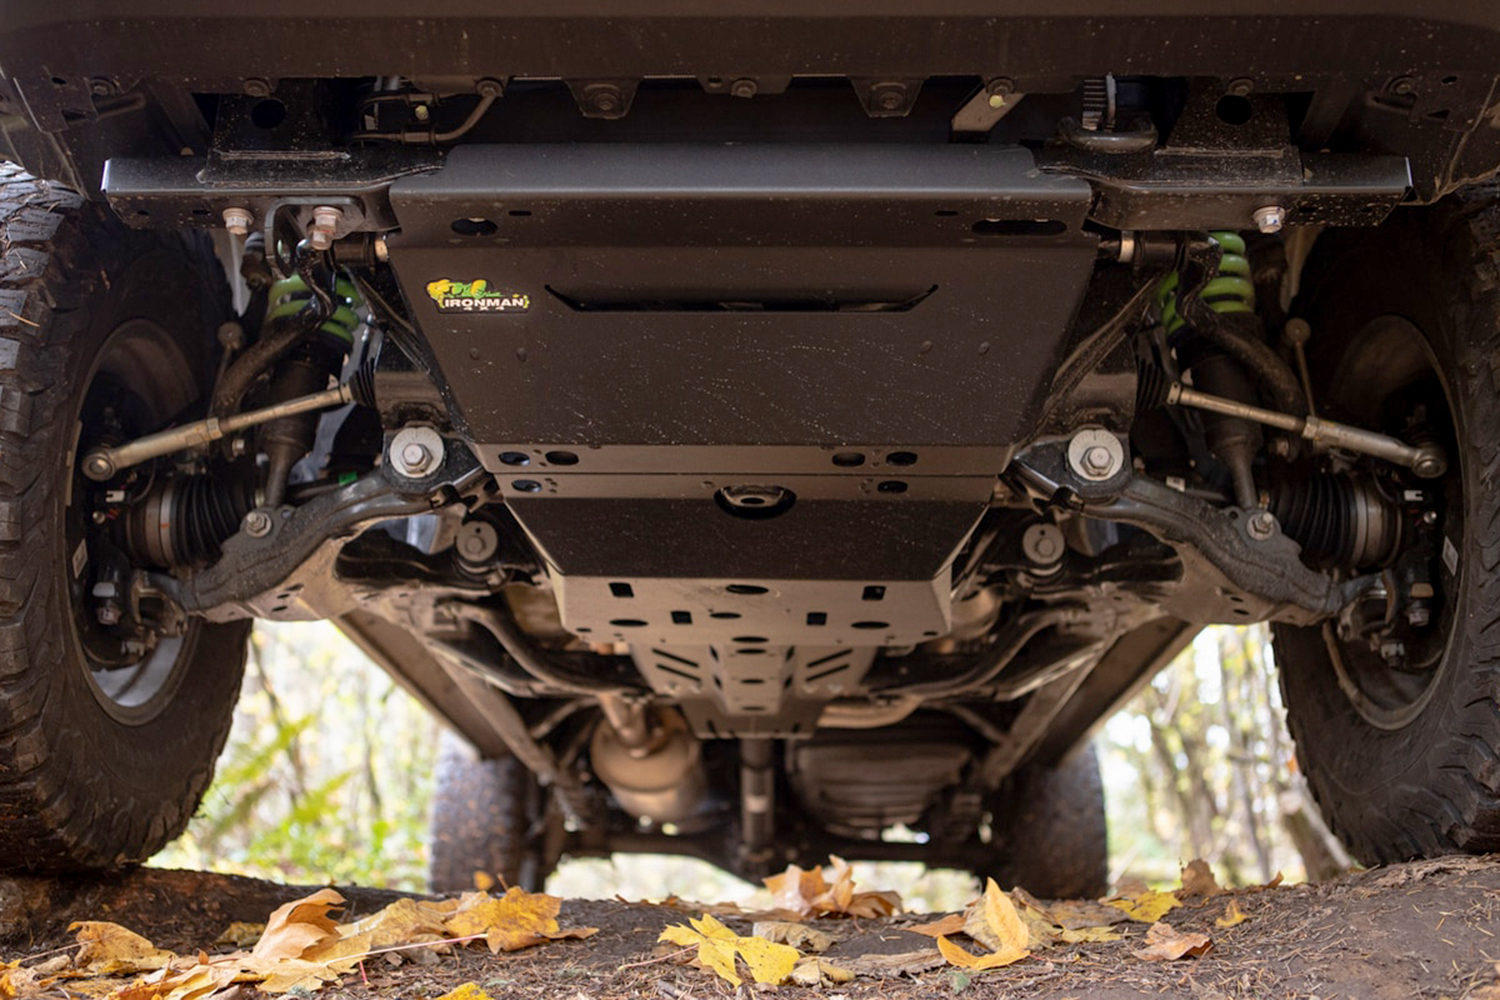 Will the skid plate kit cover the catalytic converters?